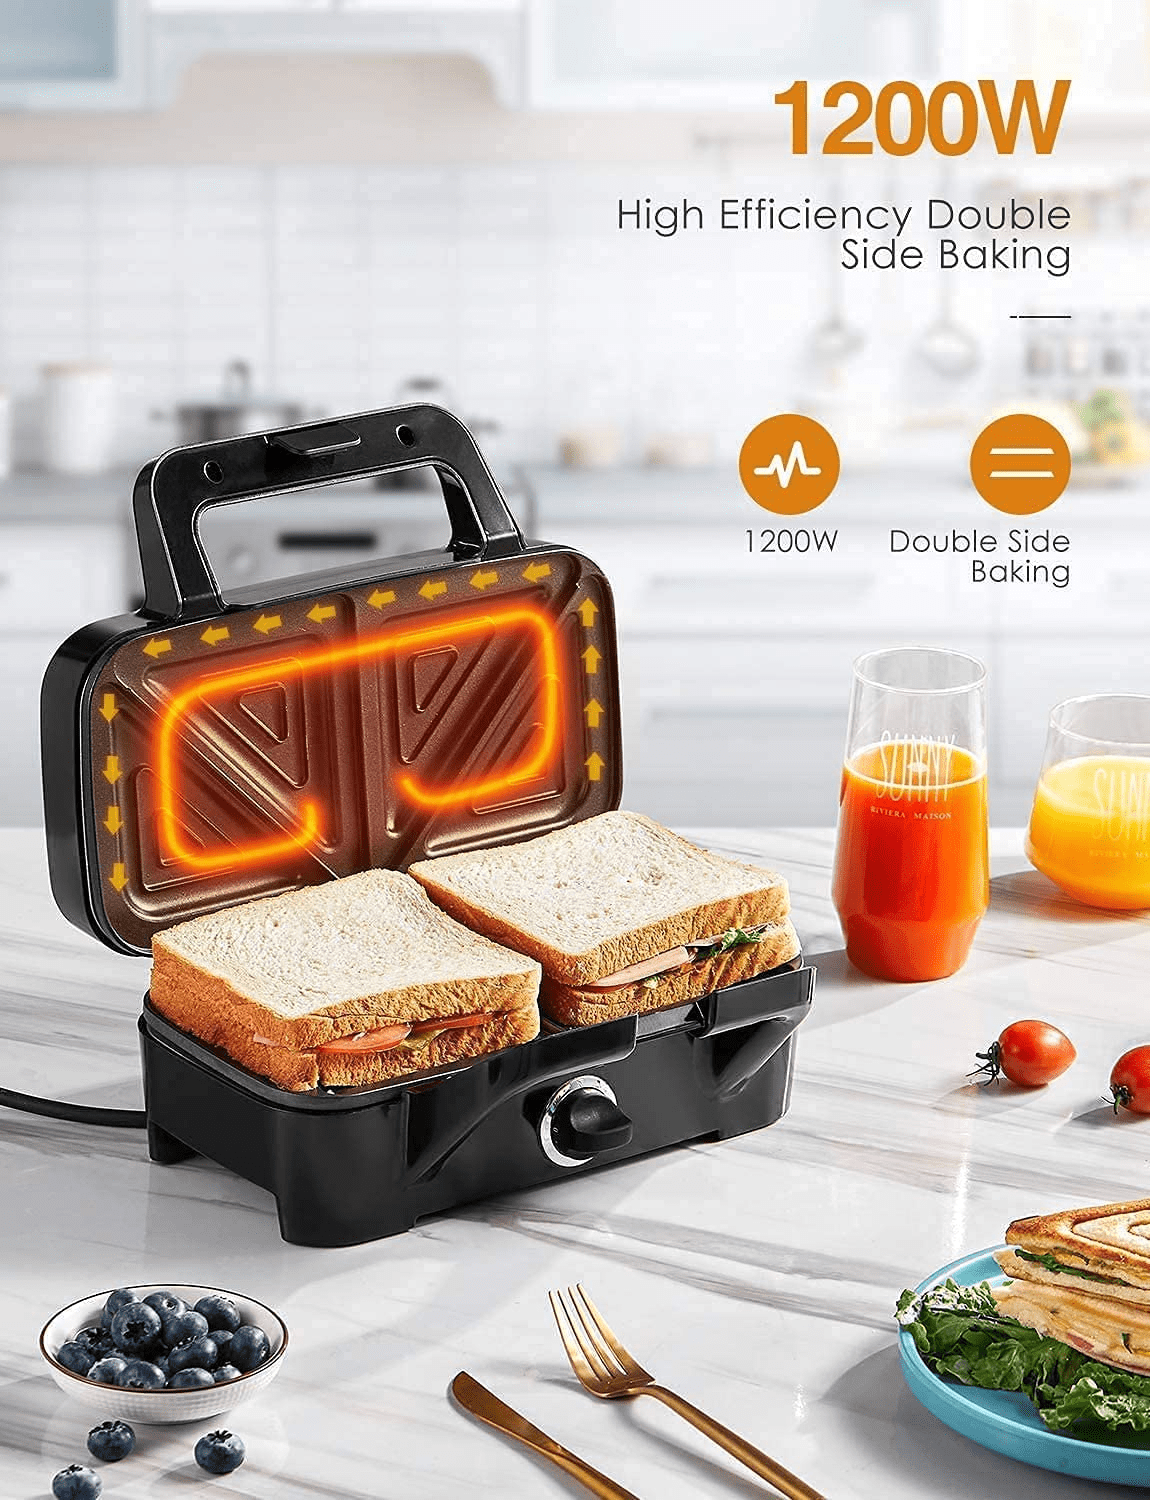  Kitchen & Dining, VonShef 220 240 Volts 3 in 1 Sandwich/Panini  Maker, Waffle Iron & Grill with Removable Plates - 700W - Stainless Steel, Bundled W/Dynastar Plug Adapters